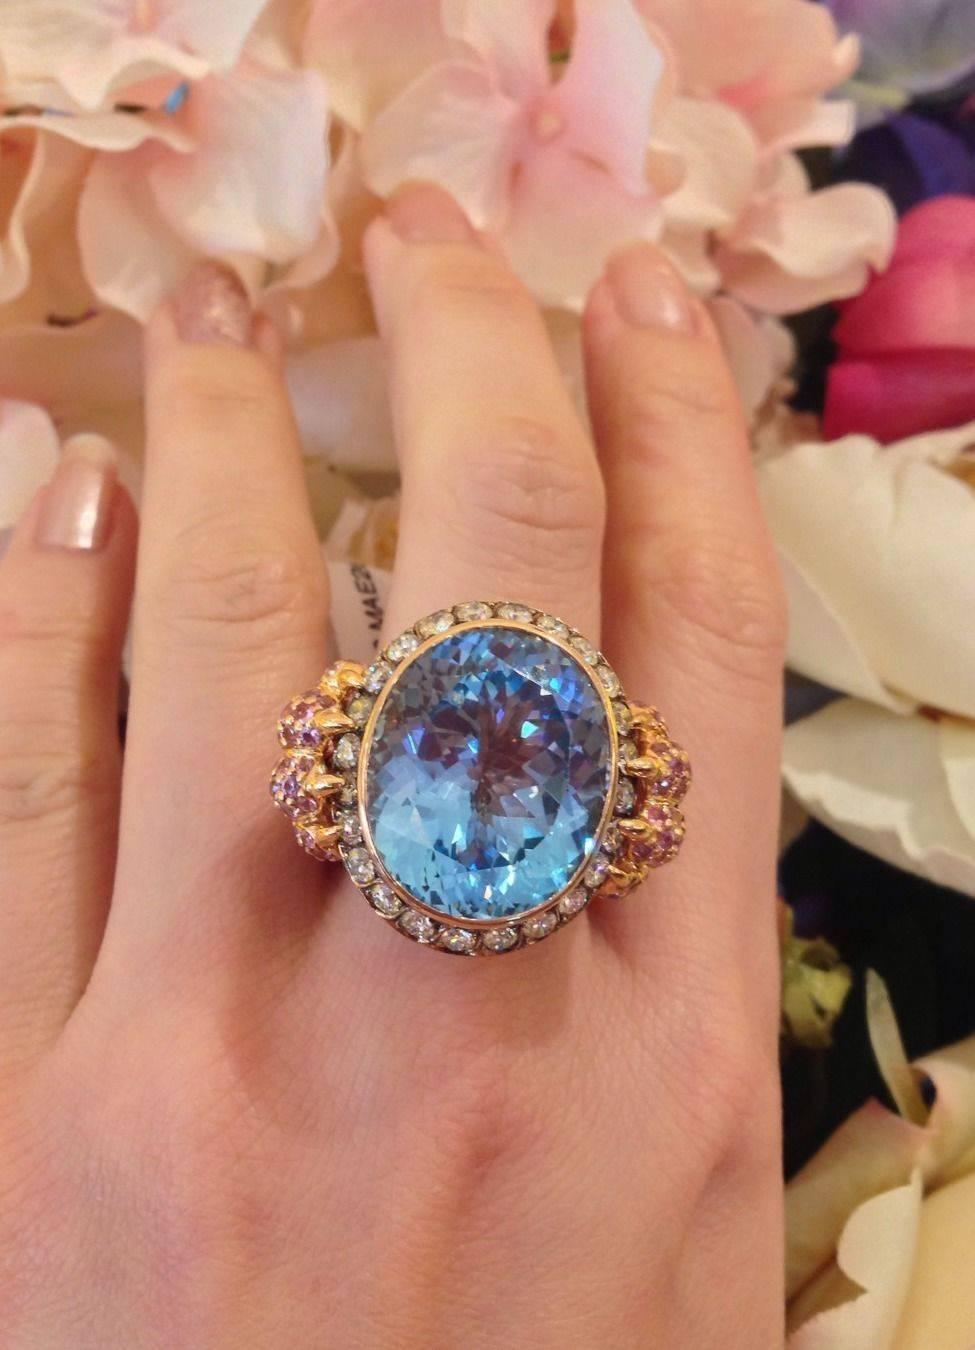 Center stone is Oval Blue Topaz 32.82 ct bezel set, surrounded by 23 round brilliant diamonds weighing 1.63 ct total, VS-SI clarity, I-J color.
Ring contains 3.01 ct of Pink, Yellow and Blue Sapphires, pave set along shank and gallery and sides. 